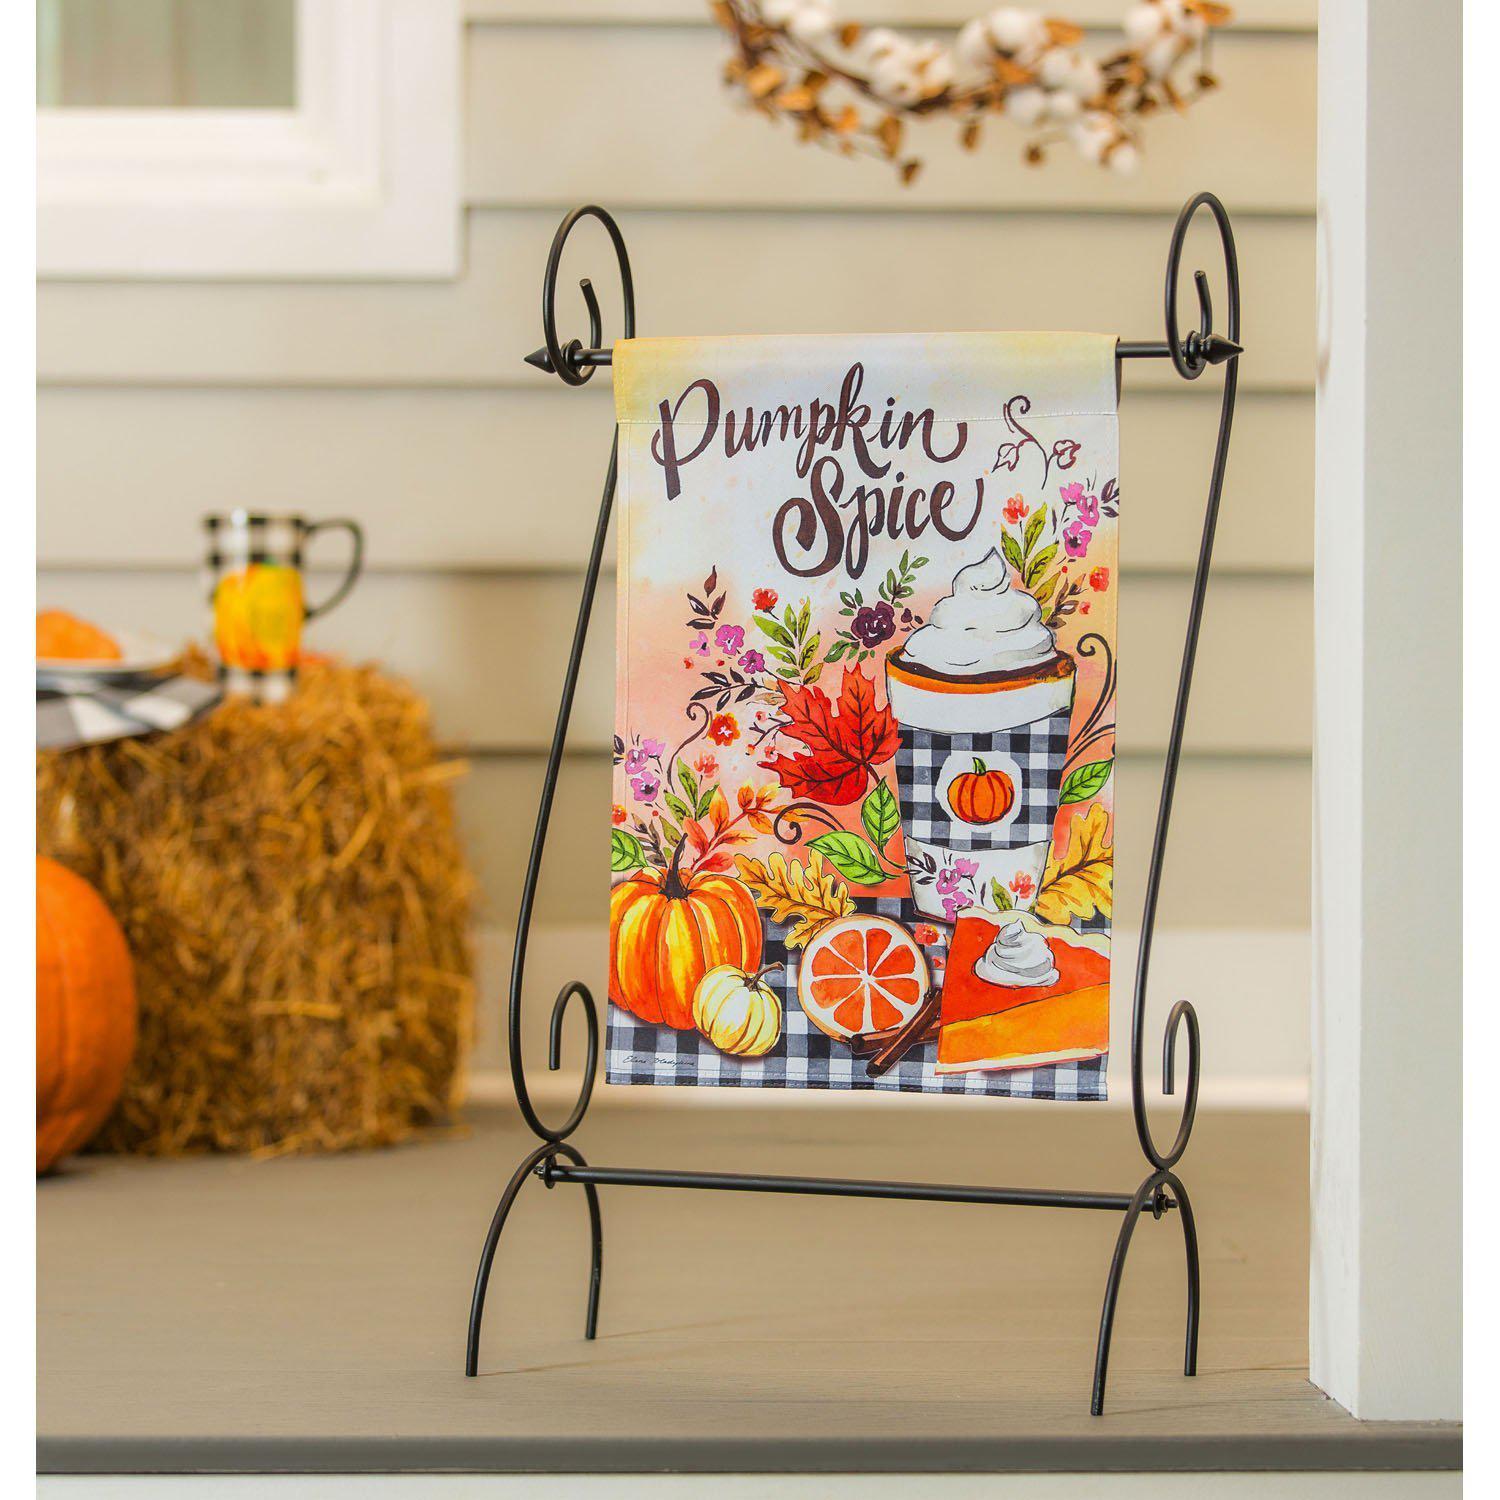 The Pumpkin Spice garden flag features a pumpkin spice drink on a autumn decorated table and the words "Pumpkin Spice". 